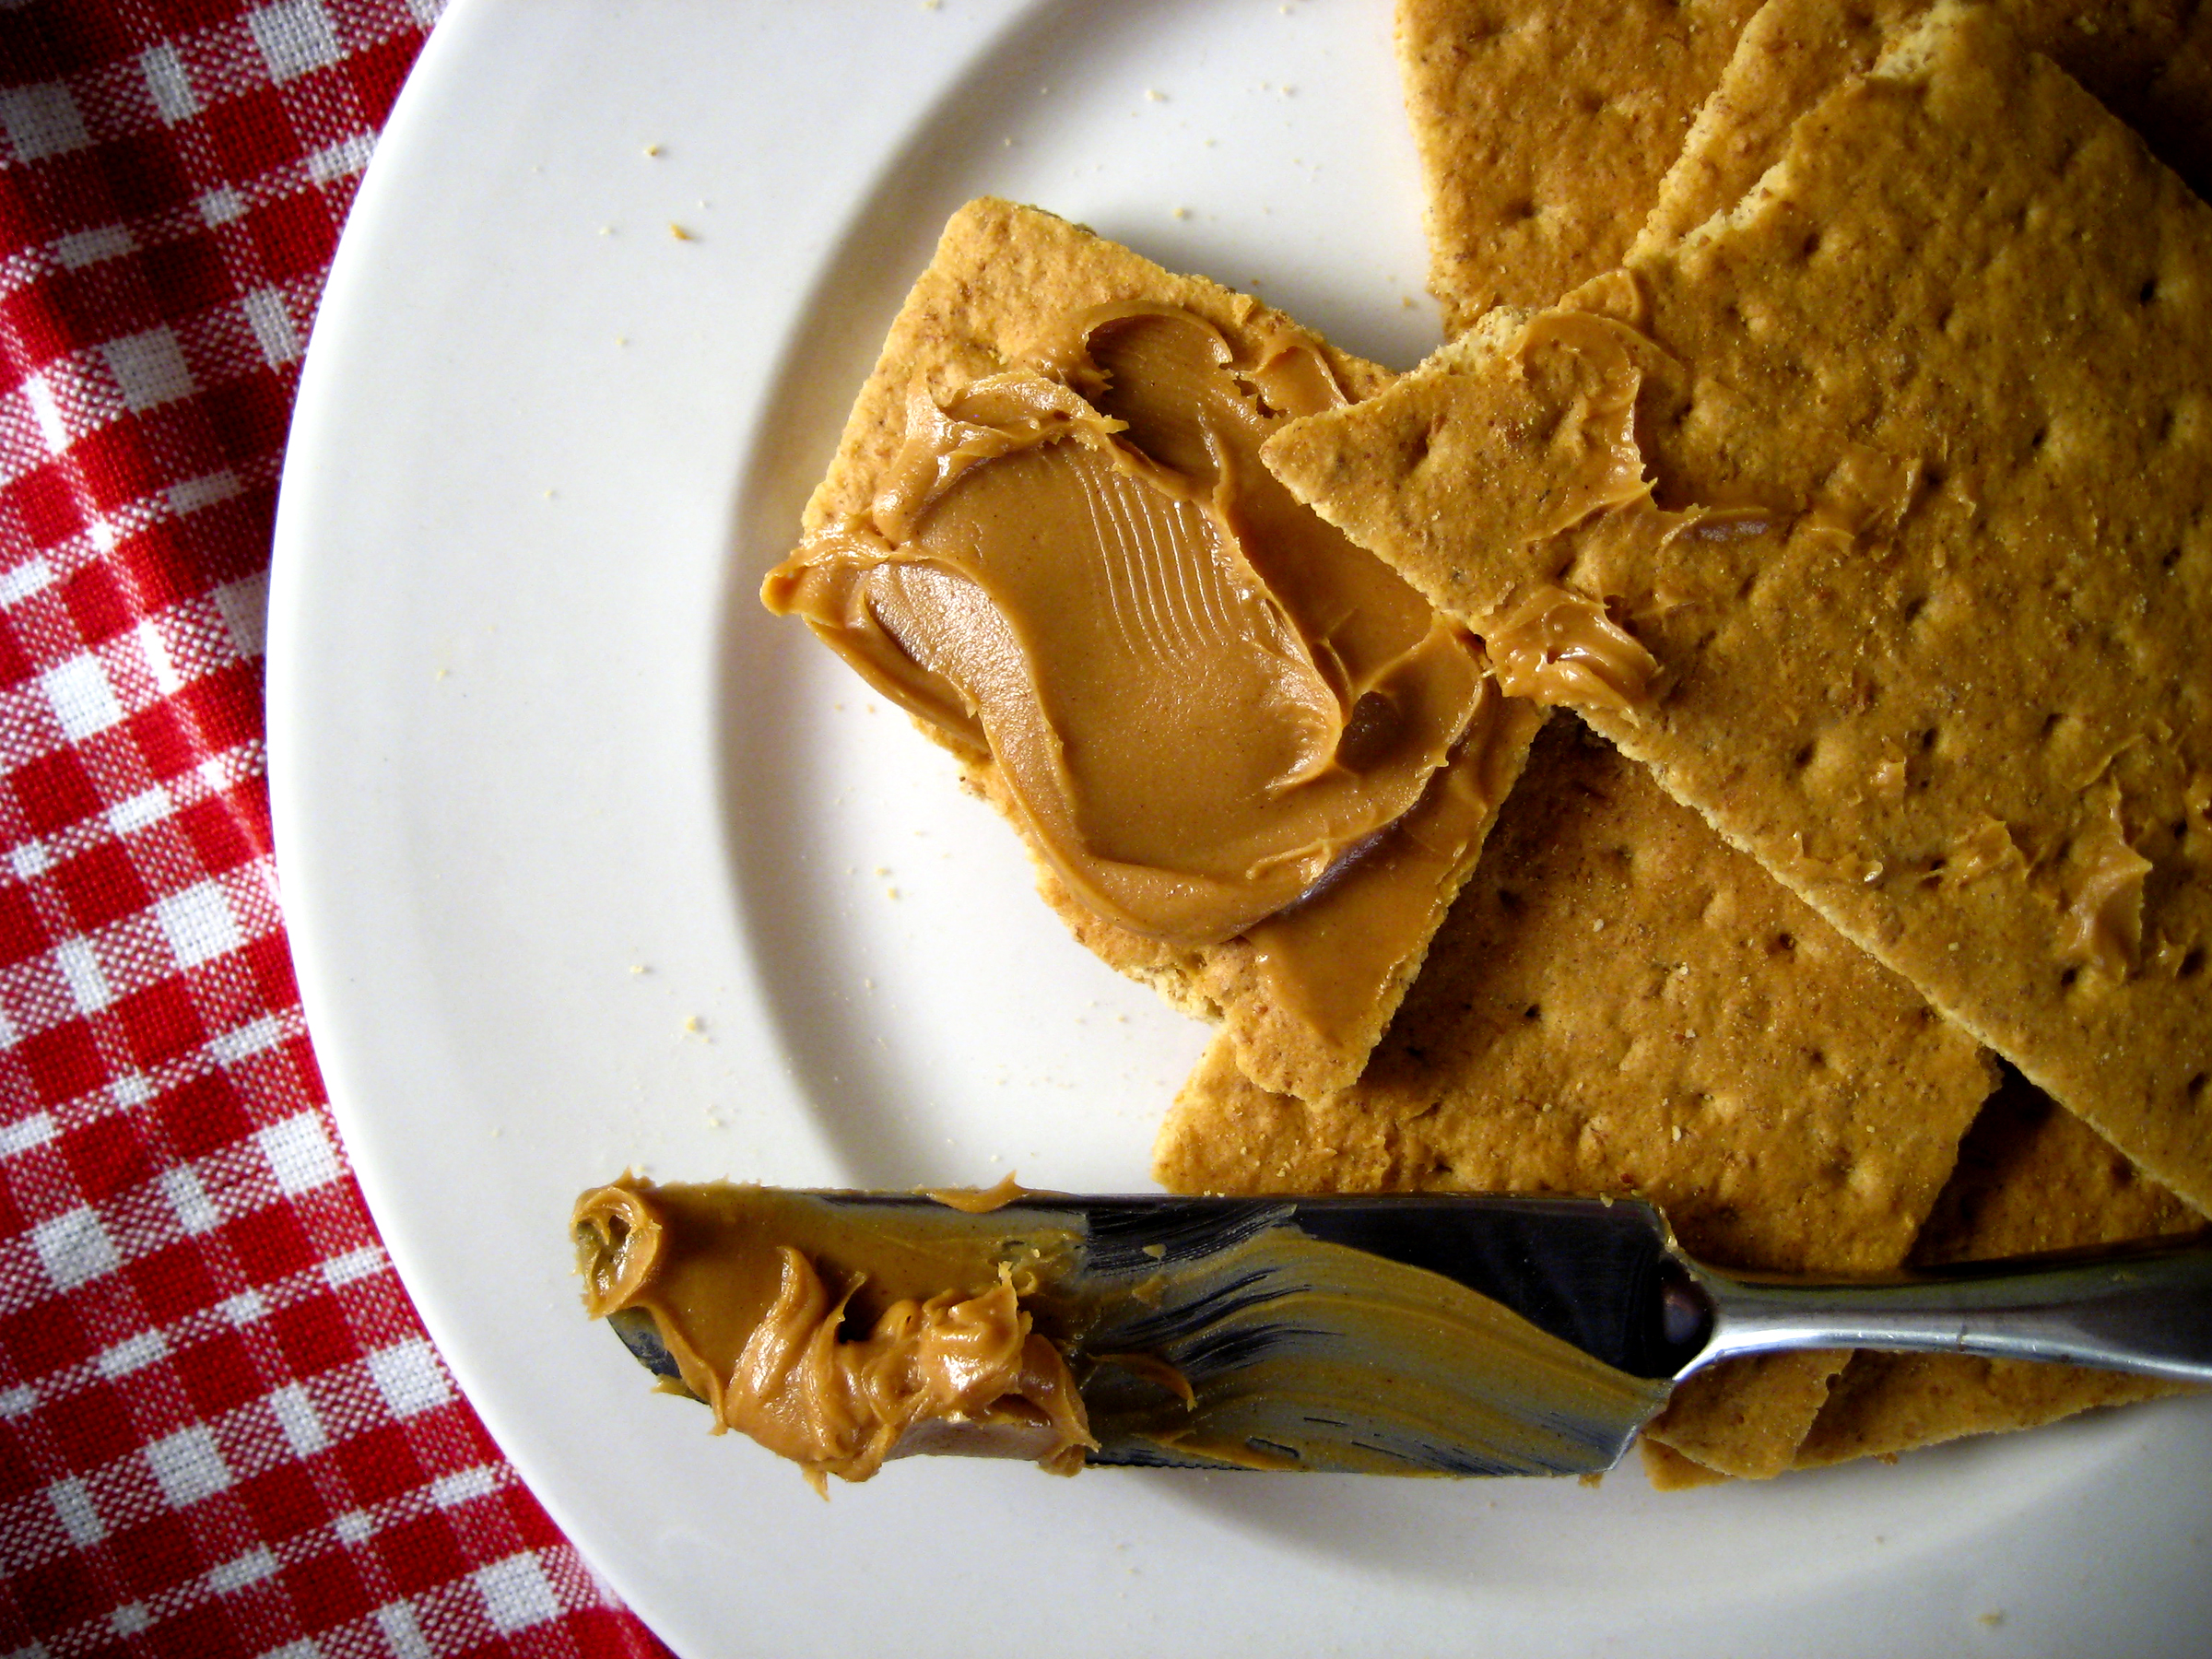 Graham crackers with spread